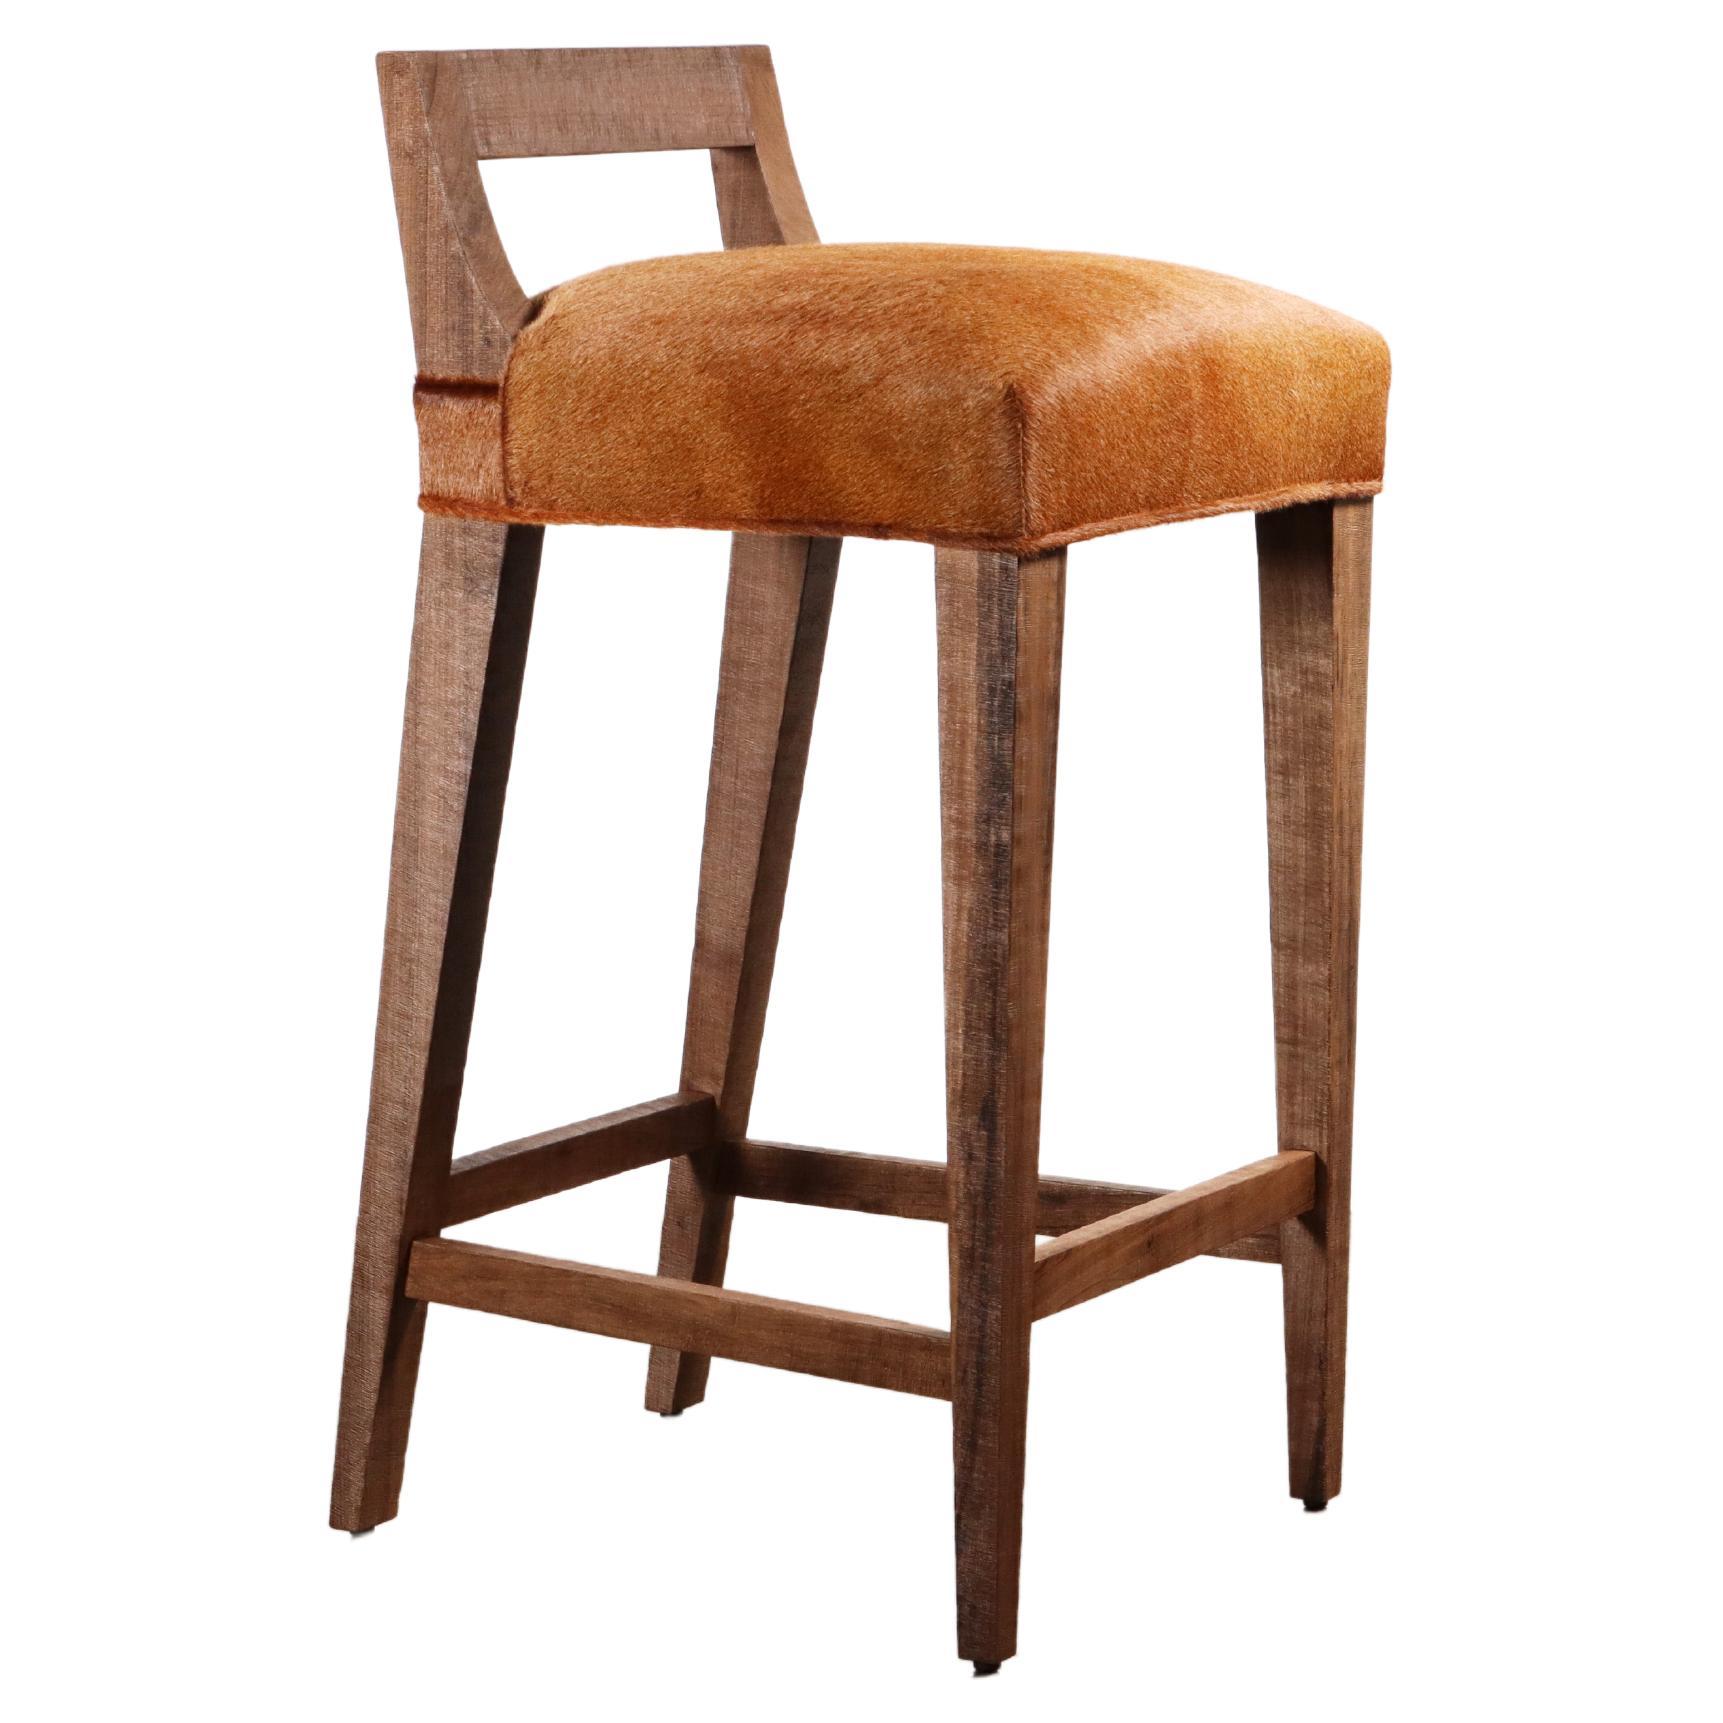 Exotic Wood Contemporary Stool in Hair Hide Leather from Costantini, Ecco